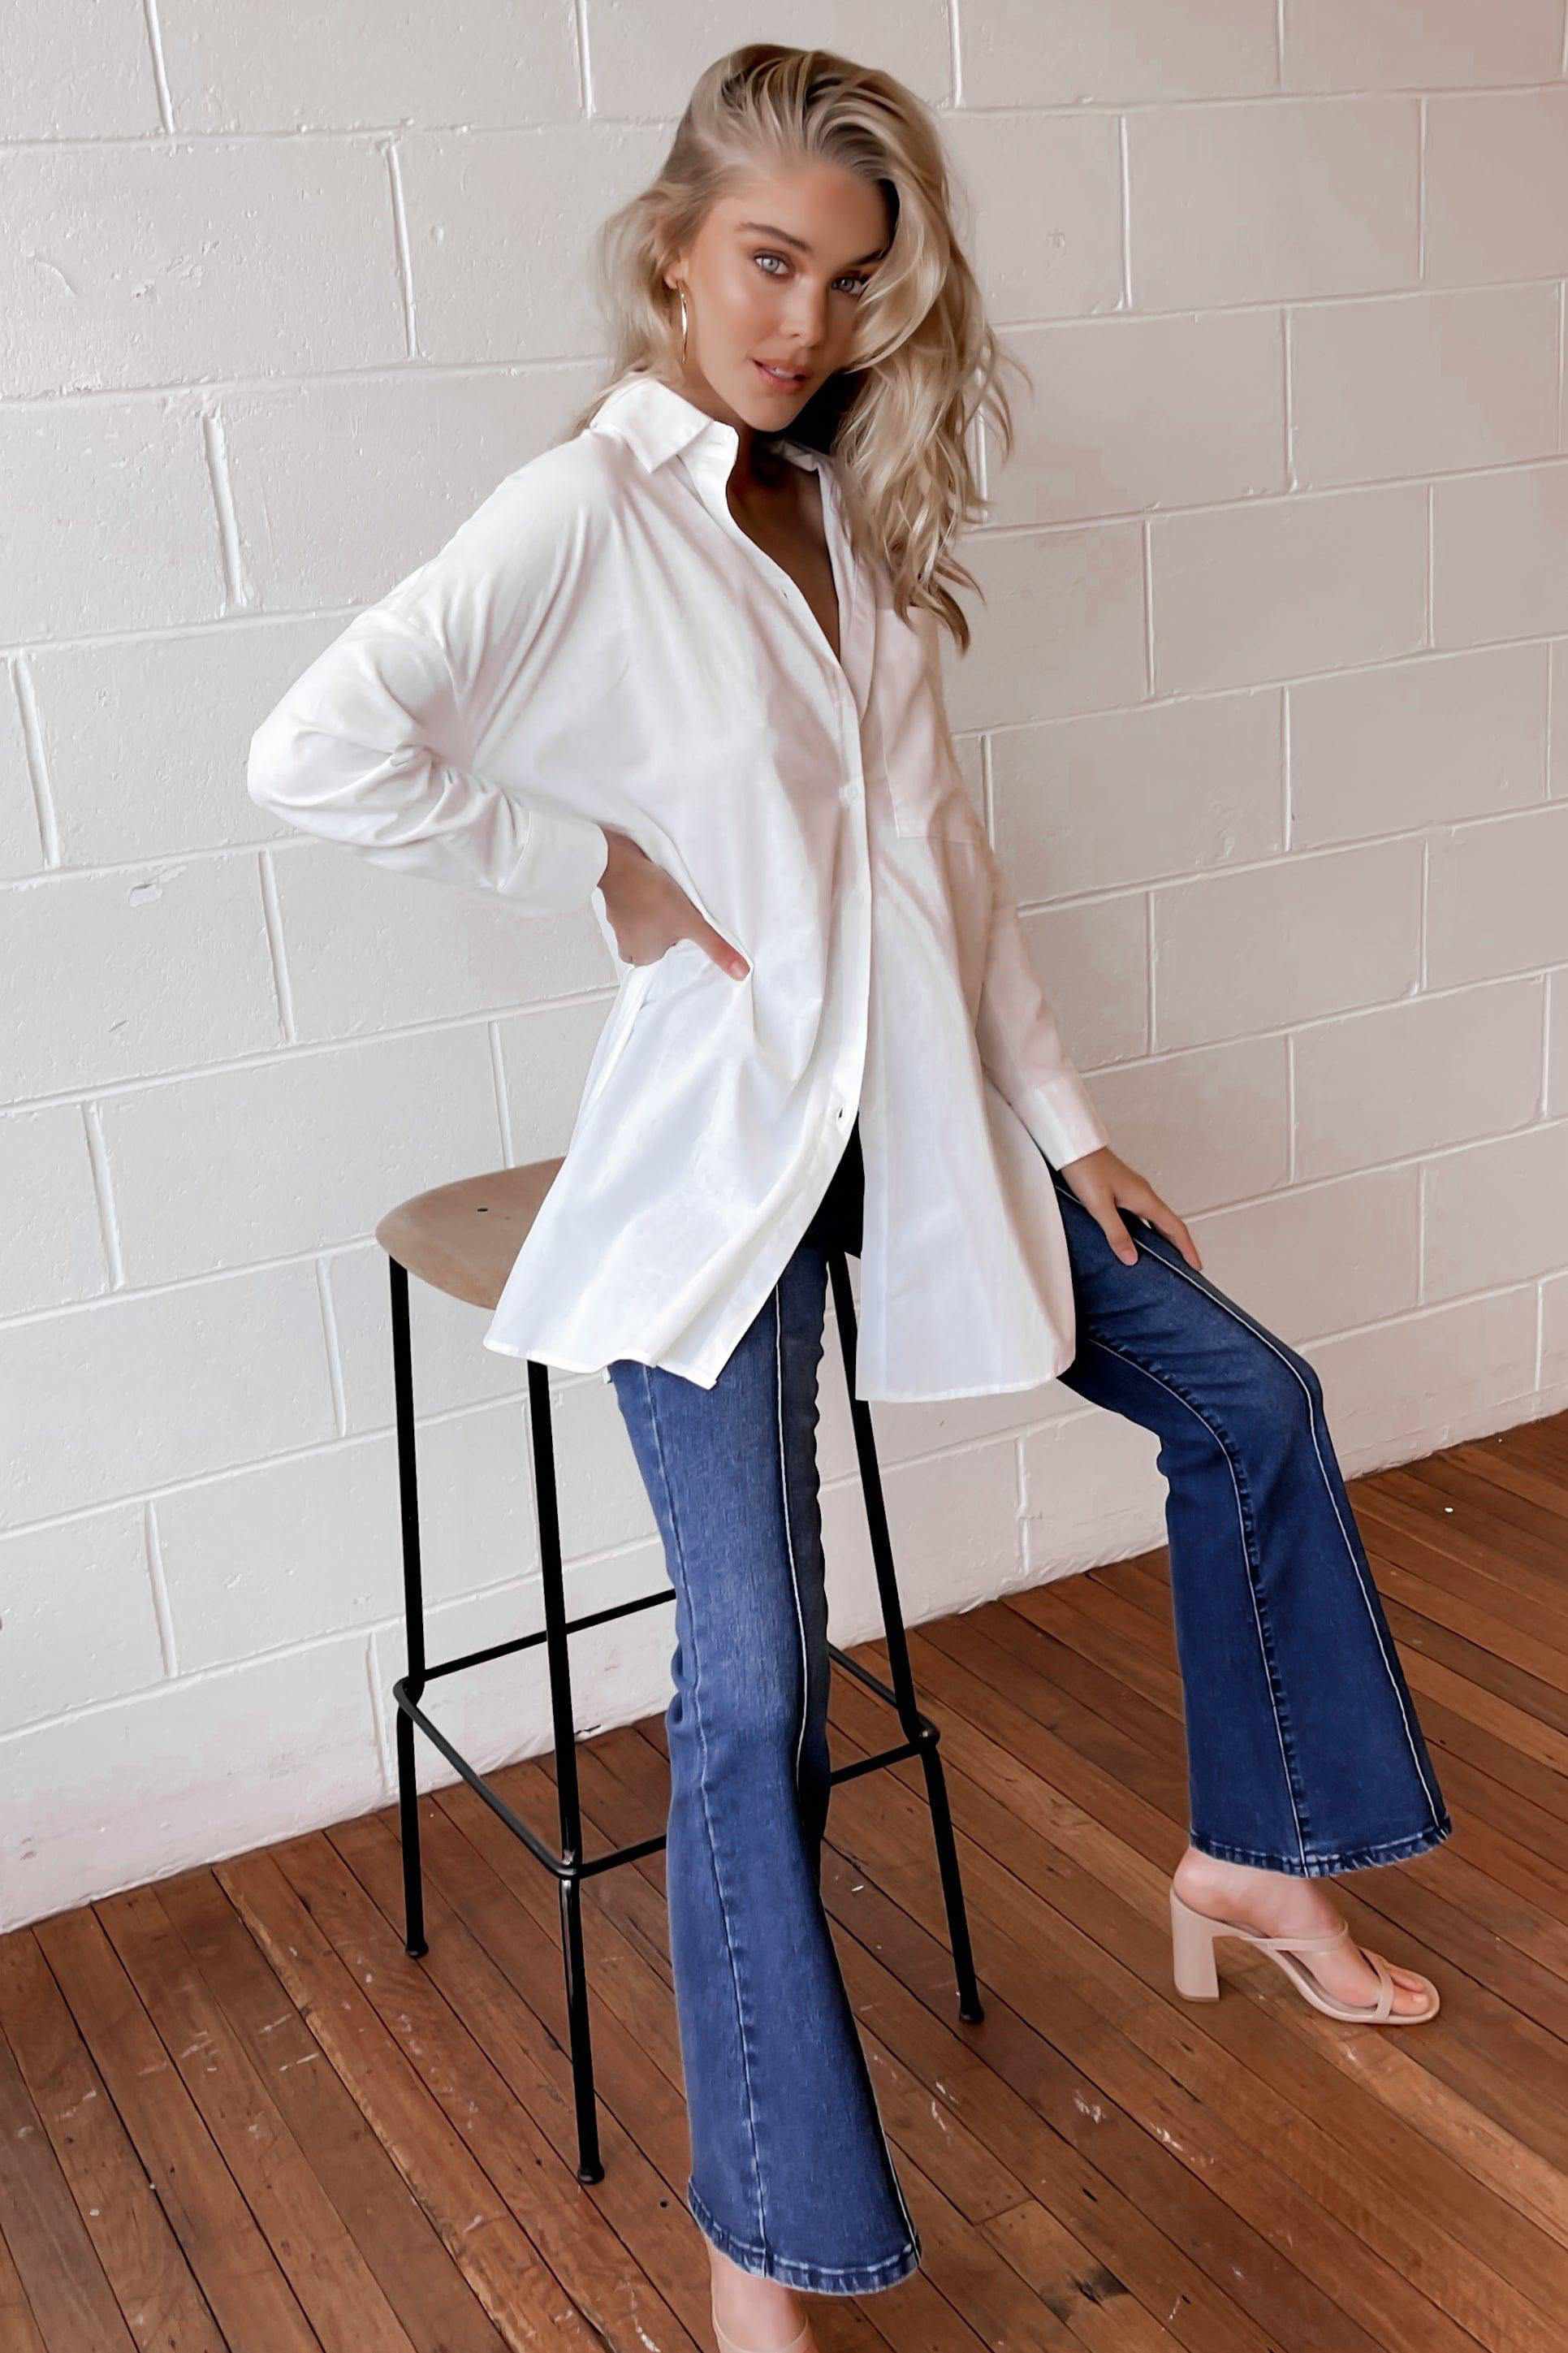 Varlita Top, COTTON, LONG SLEEVE, TOP, TOPS, WHITE, Our New Varlita Top Is Now Only $61.00 Exclusive At Mishkah, Our New Varlita Top is now only $61.00-We Have The Latest Women's Tops @ Mishkah Online Fashion Boutique-MISHKAH